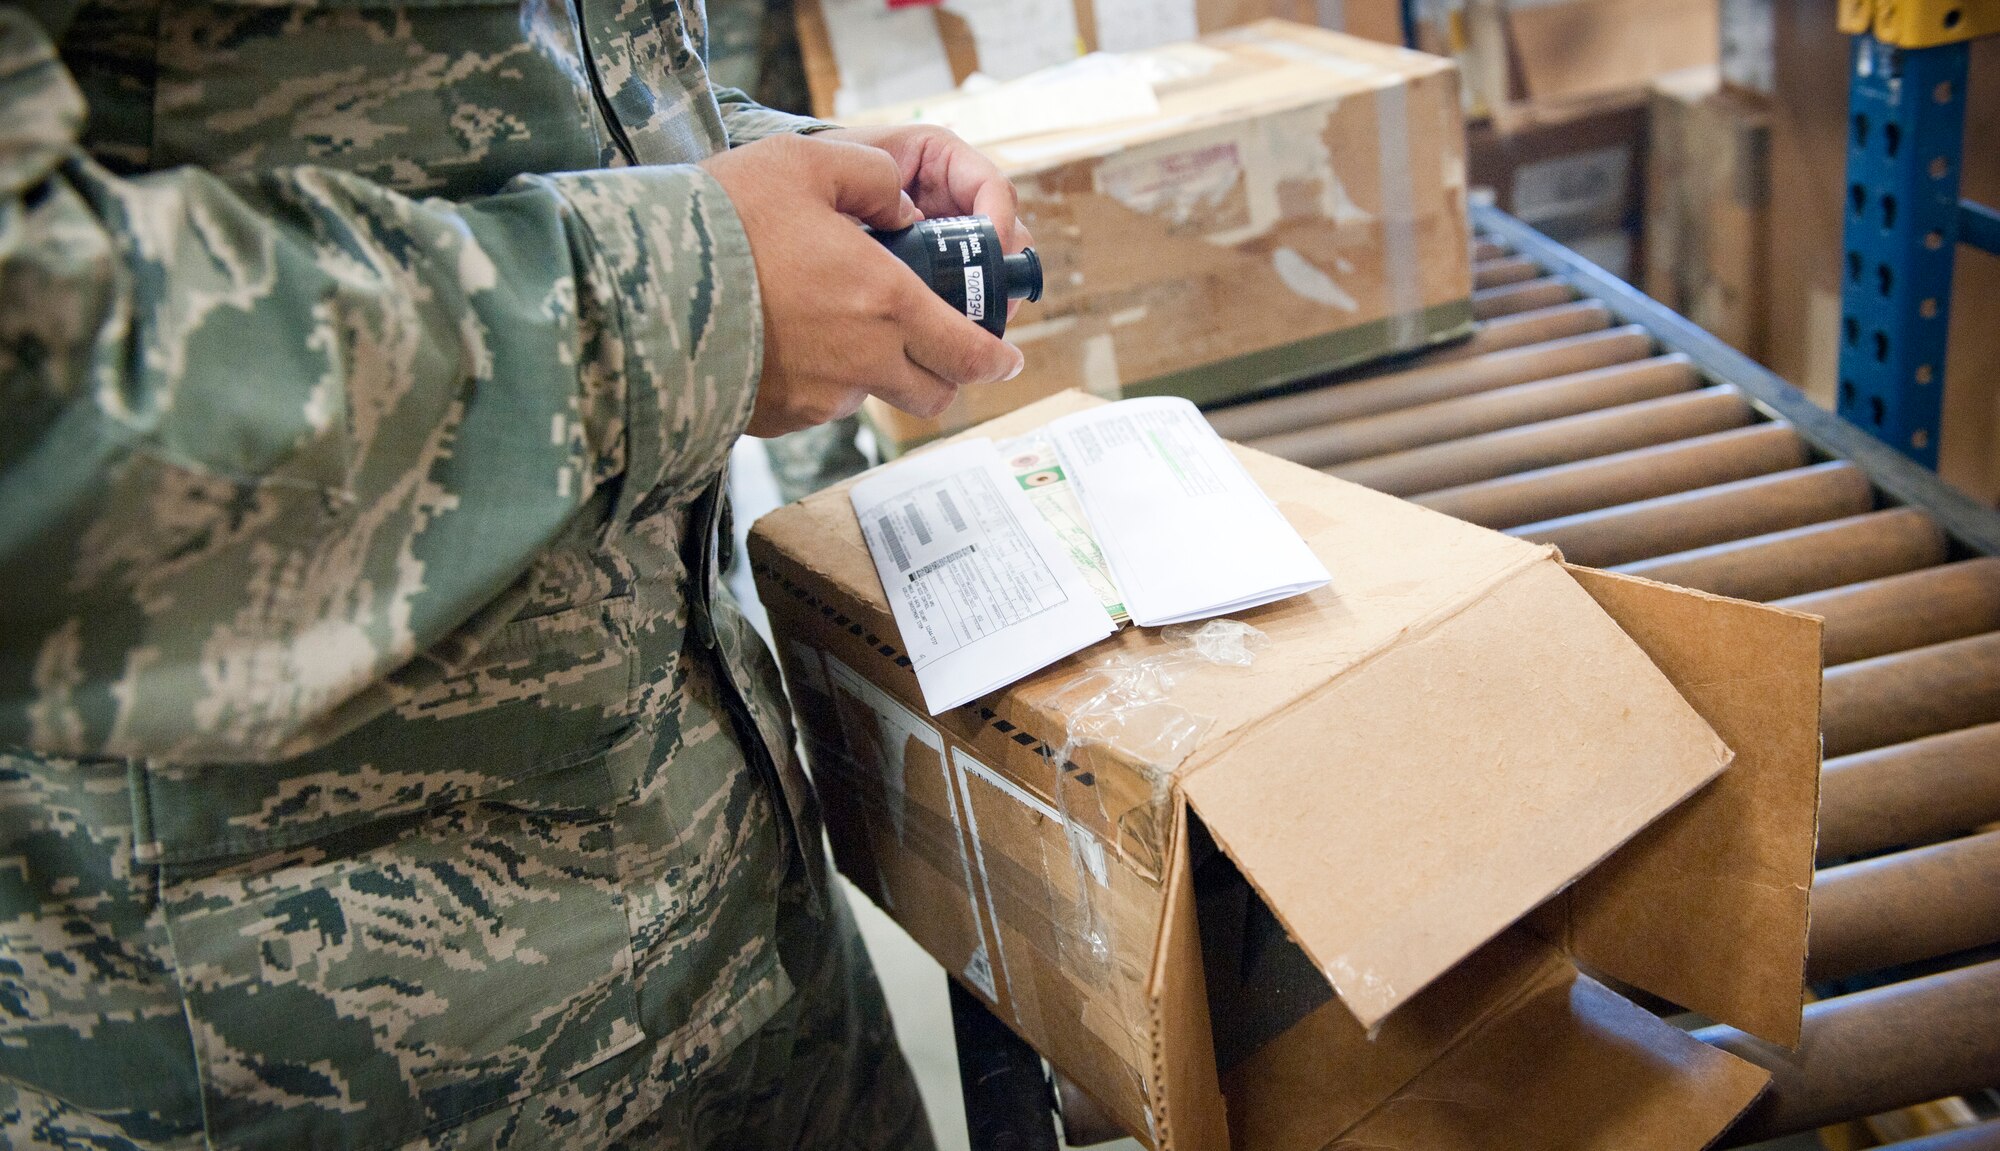 Senior Airman Matthew Stilwell, 1st Special Operations Logistic Readiness Squadron supply journeyman, checks information on an unserviceable equipment label at Hurlburt Field, Fla., Aug. 22, 2014. Verifying label information is important to ensure that products are sent to the correct places. (U.S. Air Force photo/Senior Airman Krystal M. Garrett)     